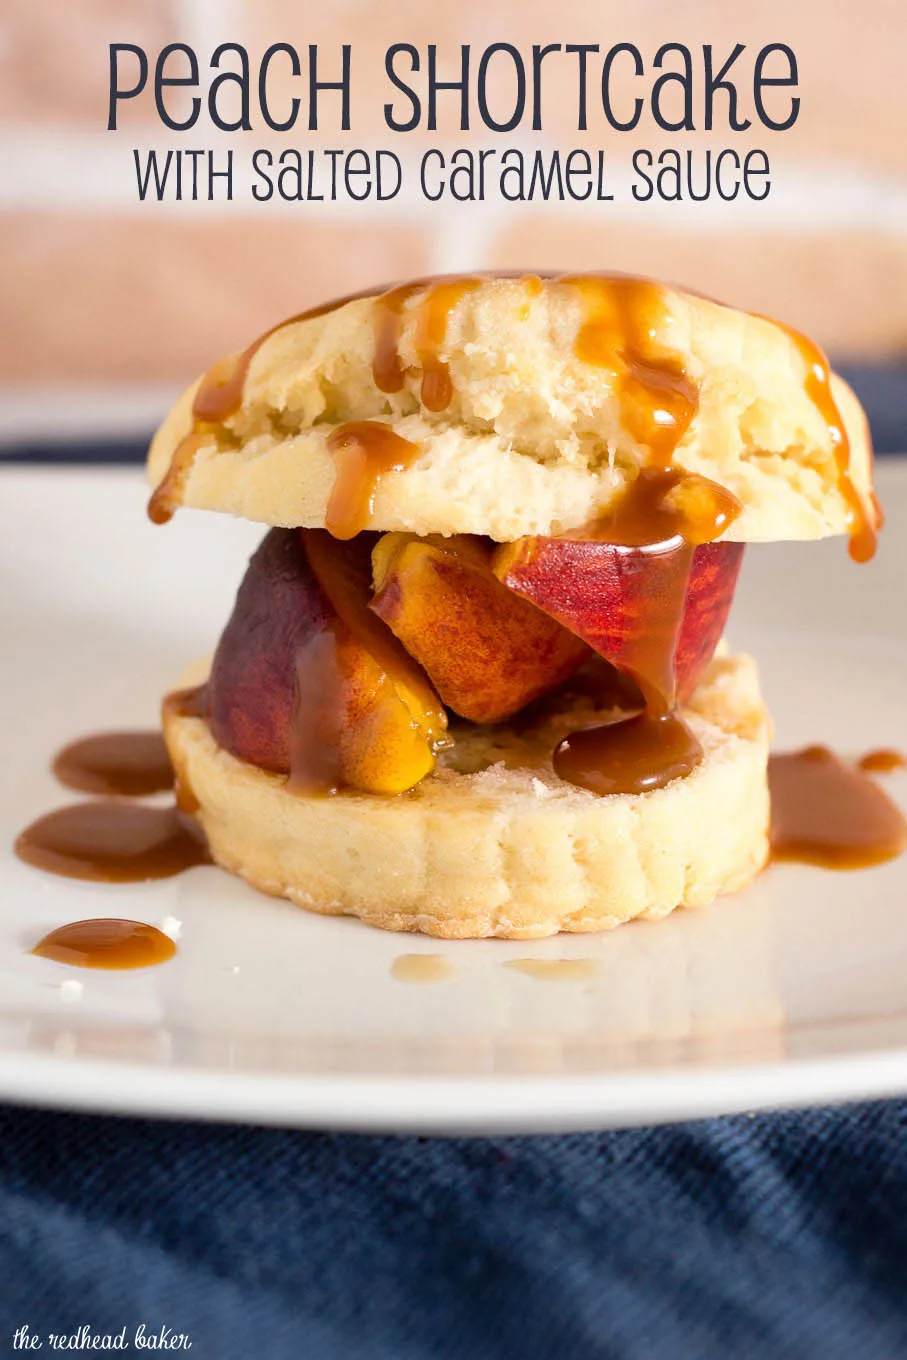 Like the classic strawberry version, peach shortcake combines a sweet biscuit with brandied brown-sugar peaches, and is topped off with a drizzle of salted caramel sauce. #CookoutWeek